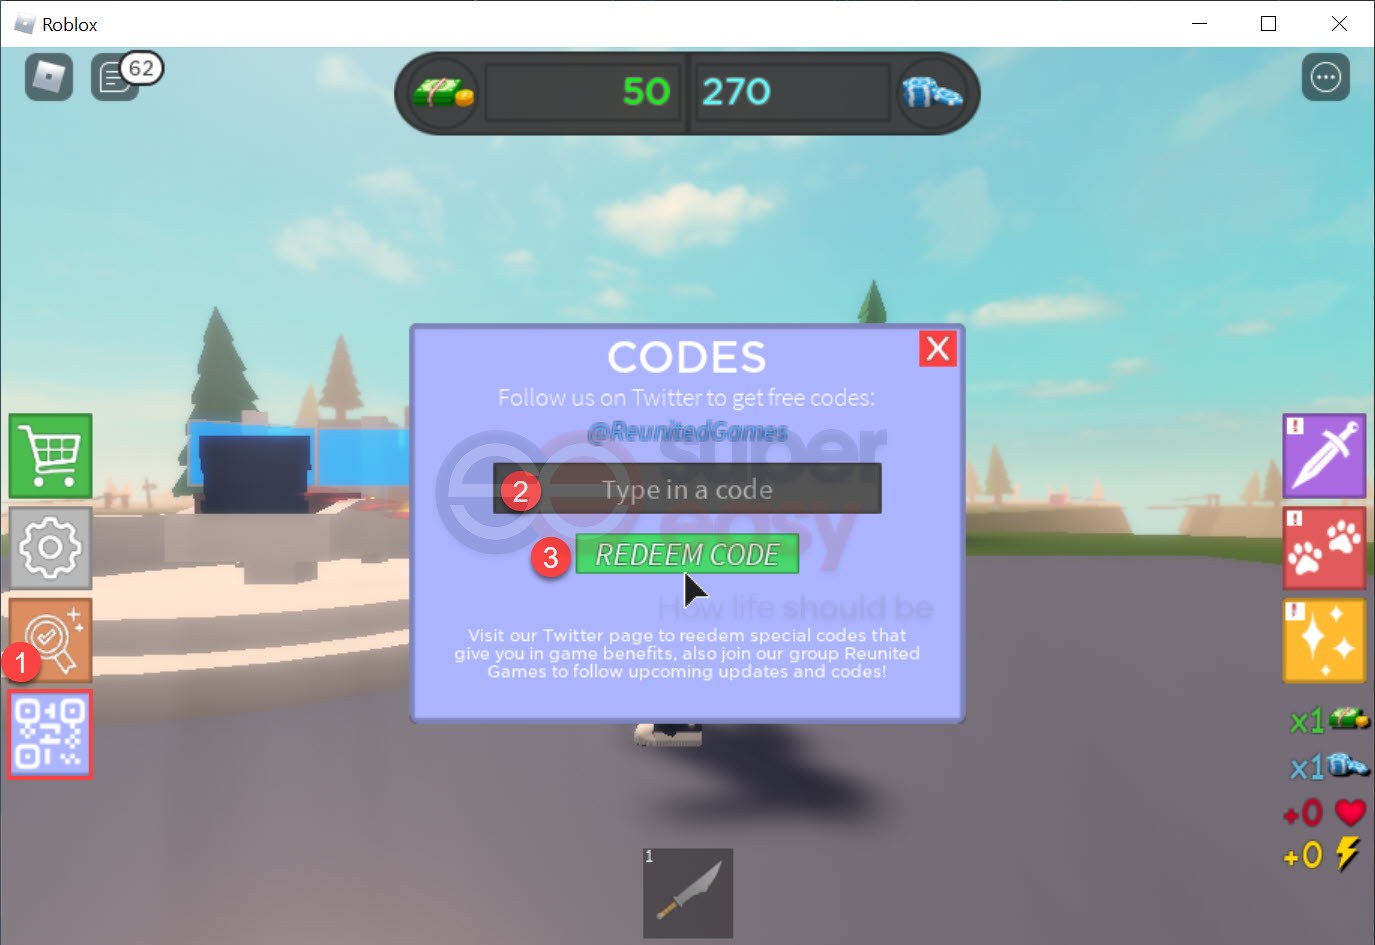 New Pet Tycoon Codes Jul 2021 Super Easy - roblox image codes for retail tycoon